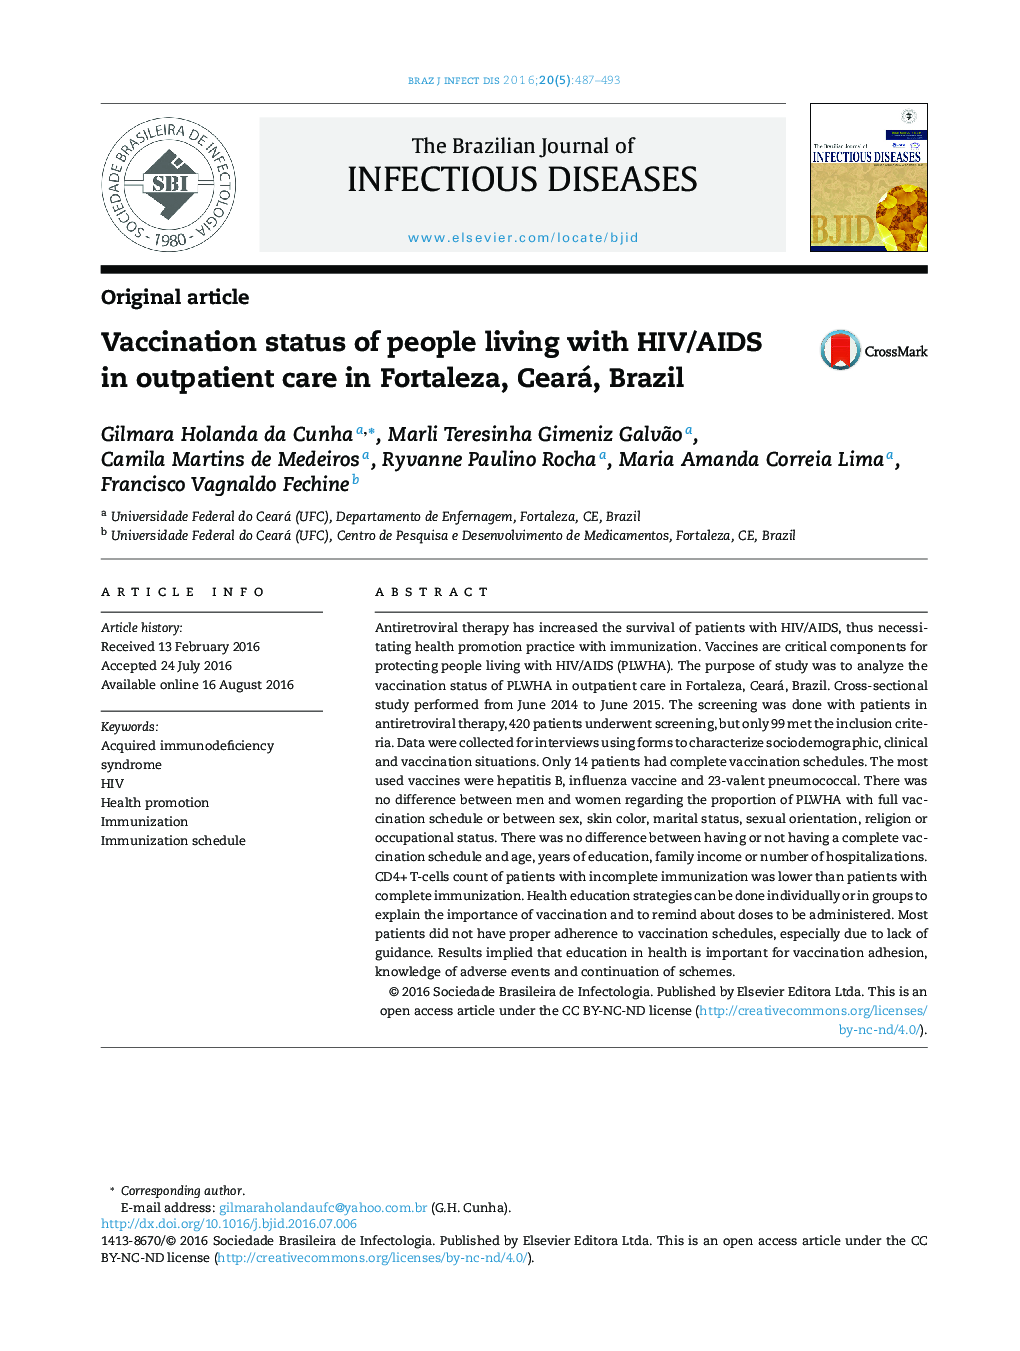 Vaccination status of people living with HIV/AIDS in outpatient care in Fortaleza, Ceará, Brazil